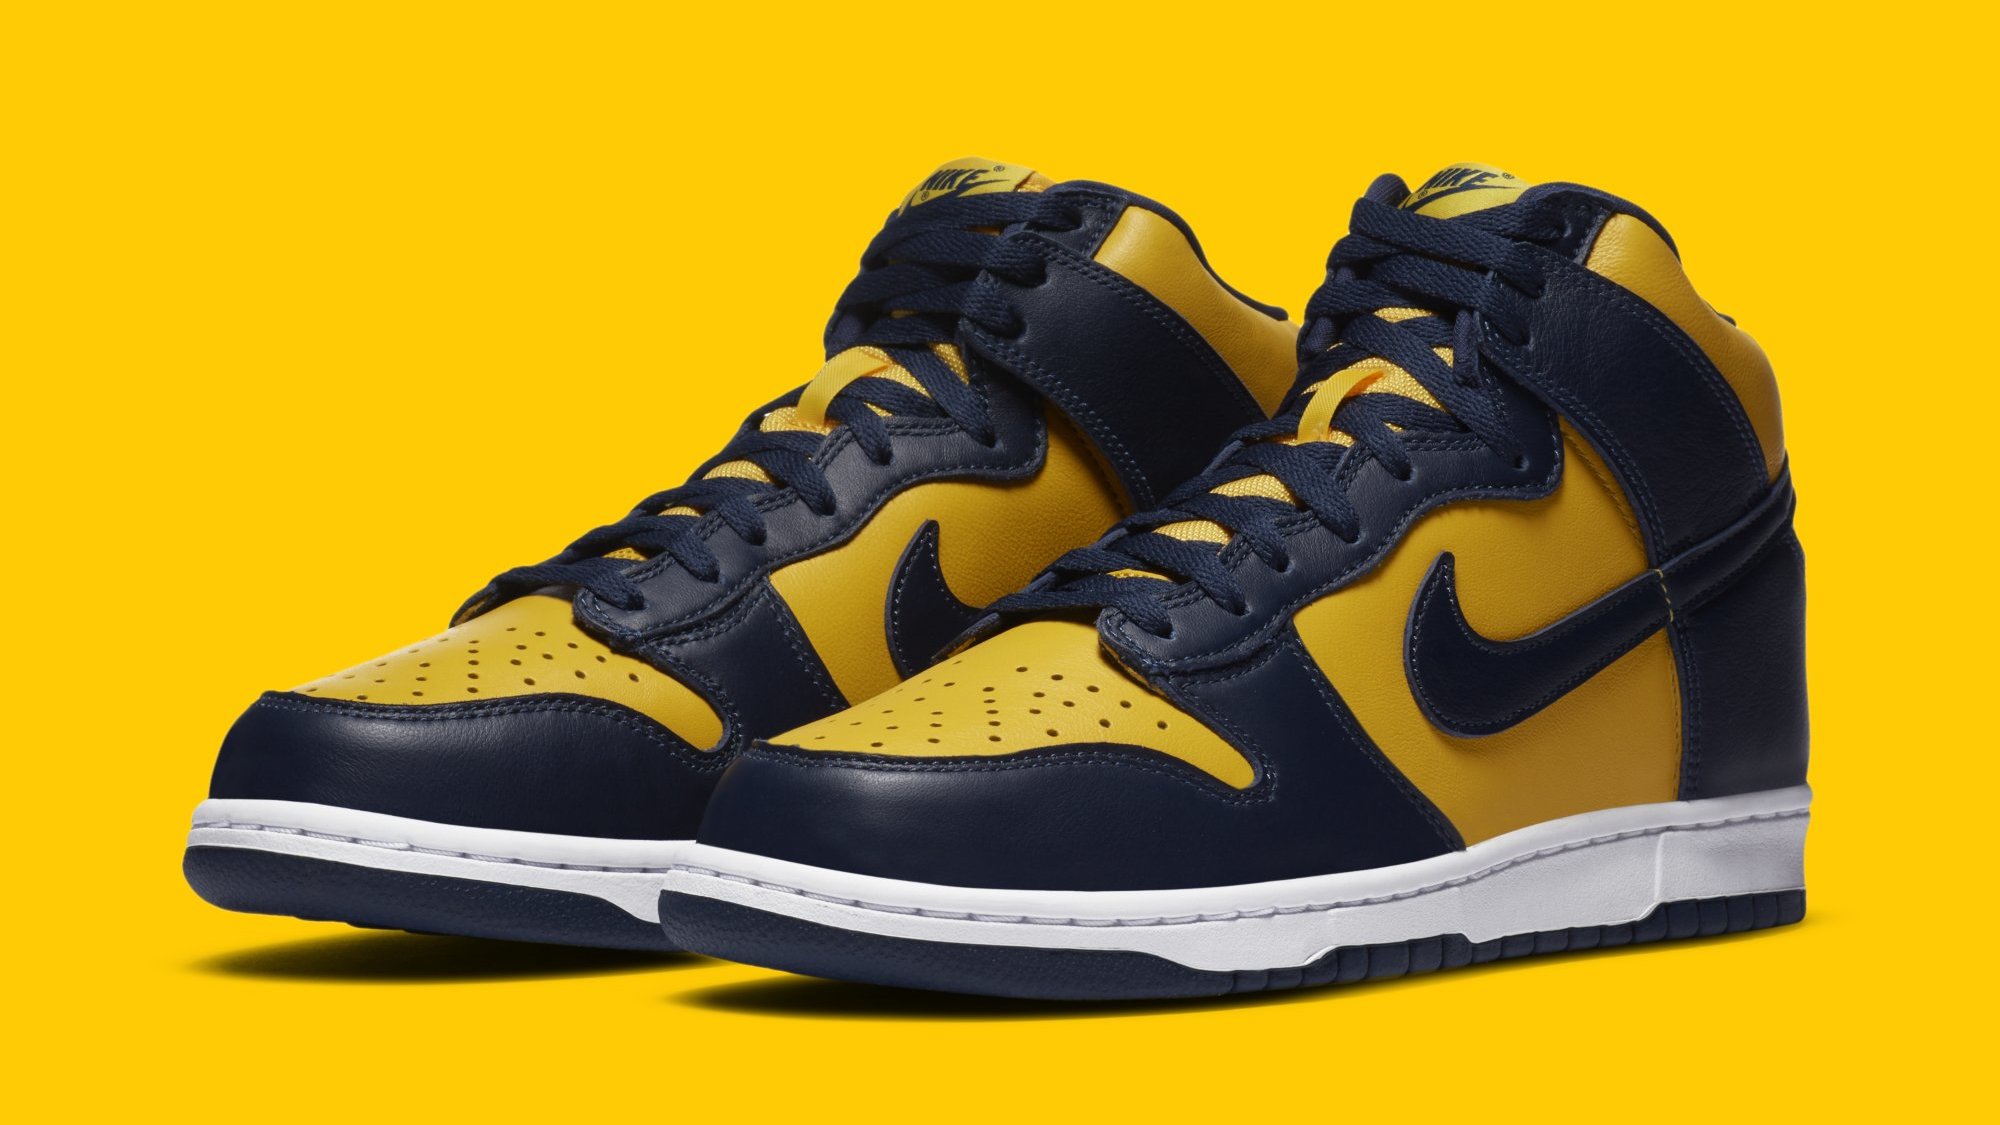 The 'Michigan' Dunk High Is Releasing Earlier Than Expected